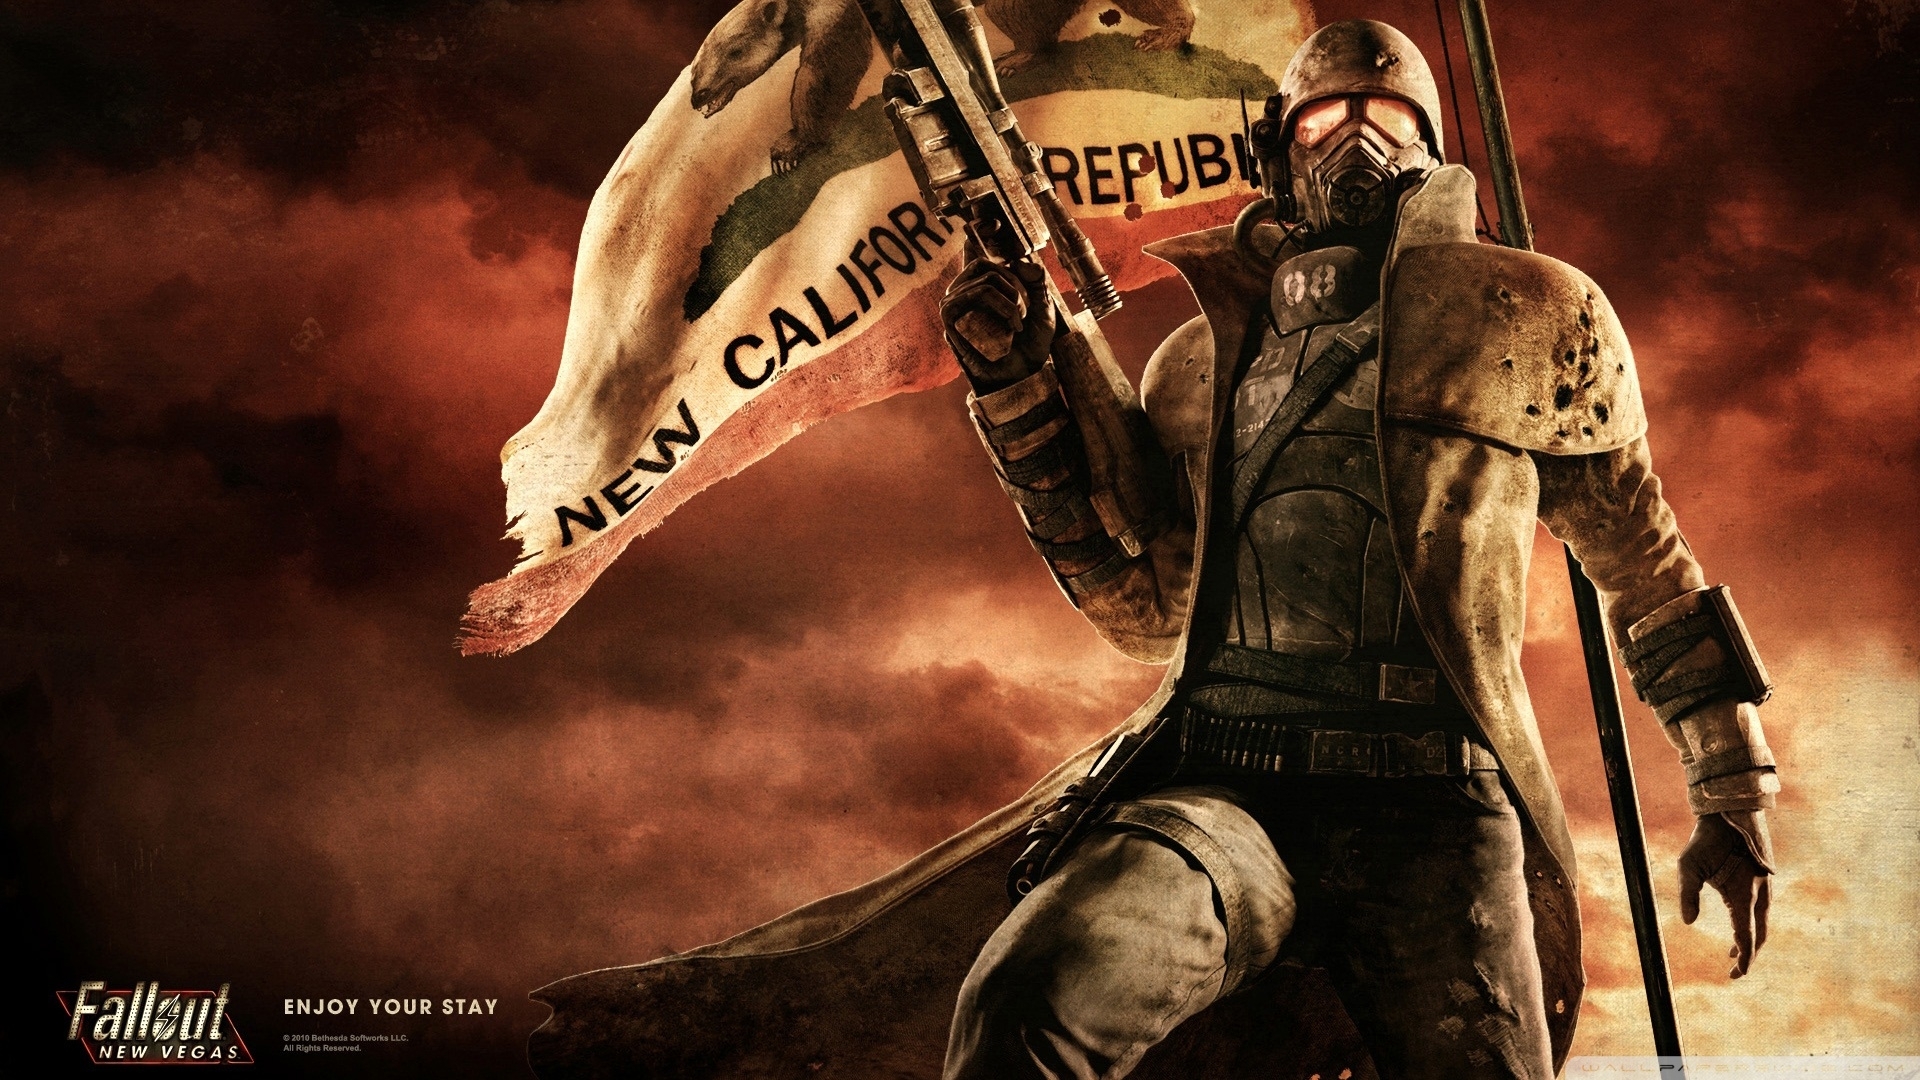 10 Best Fallout New Vegas Hd Wallpaper FULL HD 1920×1080 For PC Background